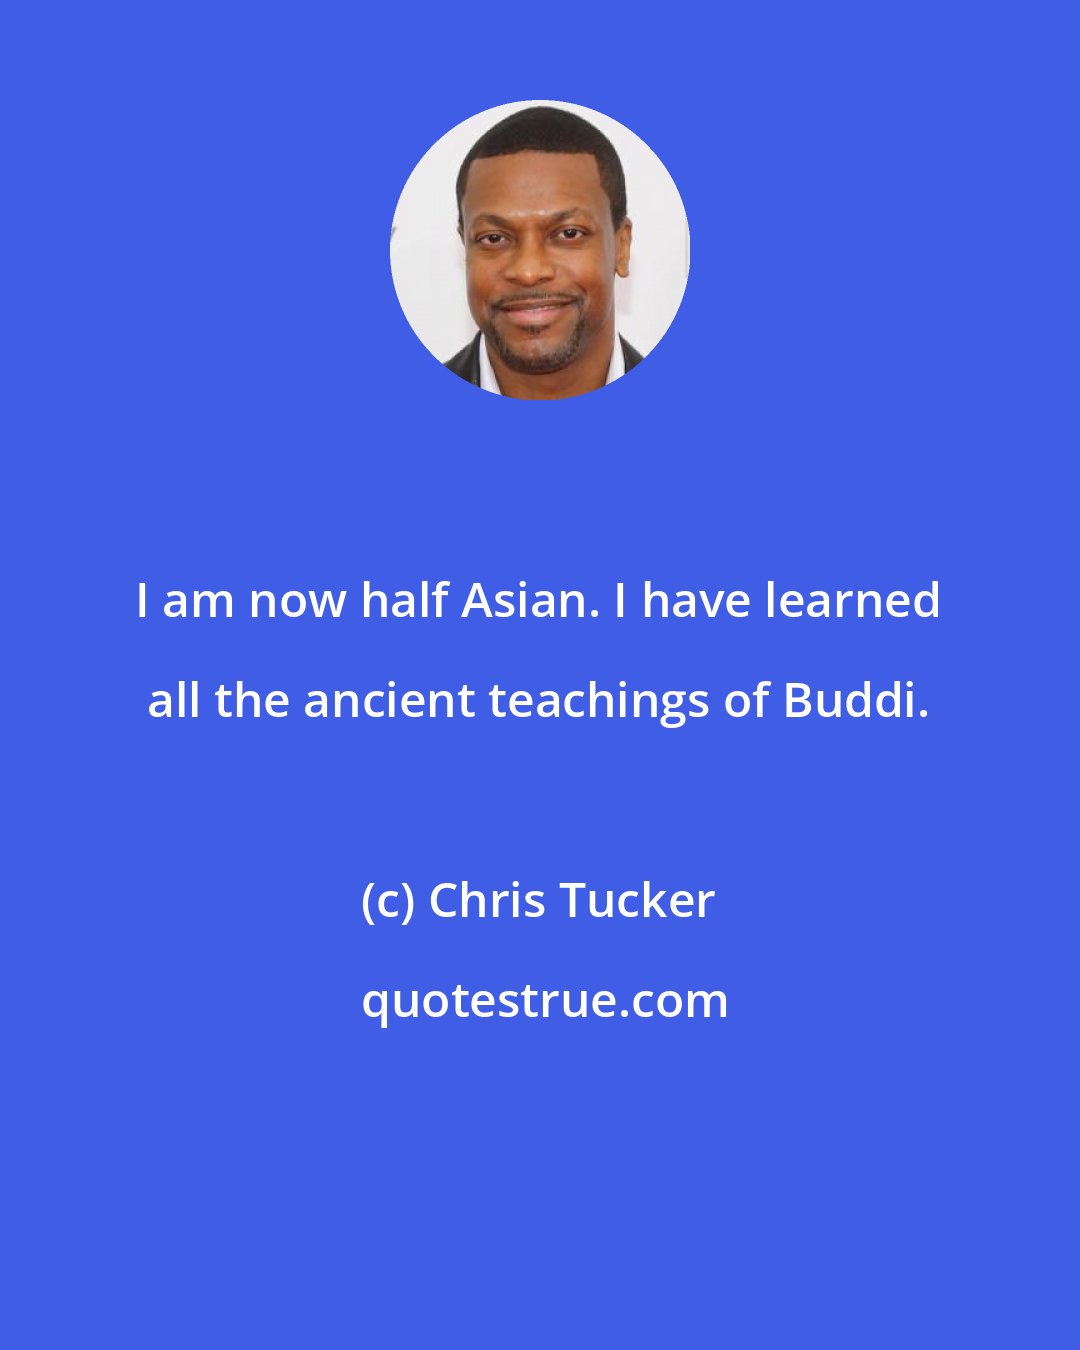 Chris Tucker: I am now half Asian. I have learned all the ancient teachings of Buddi.